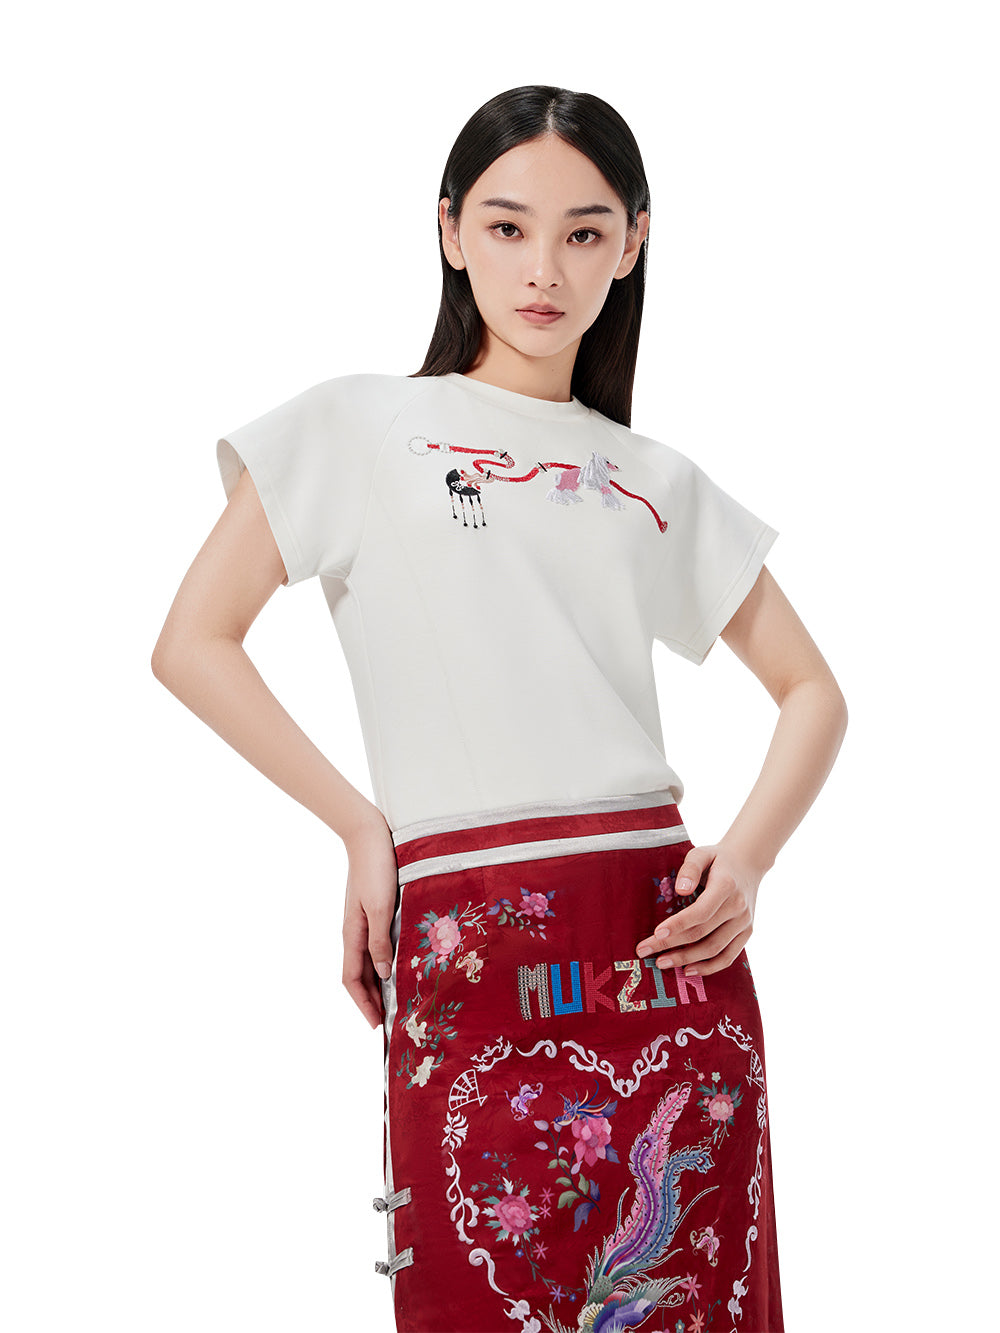 MUKZIN 2-color Loose Embroidered T-shirt